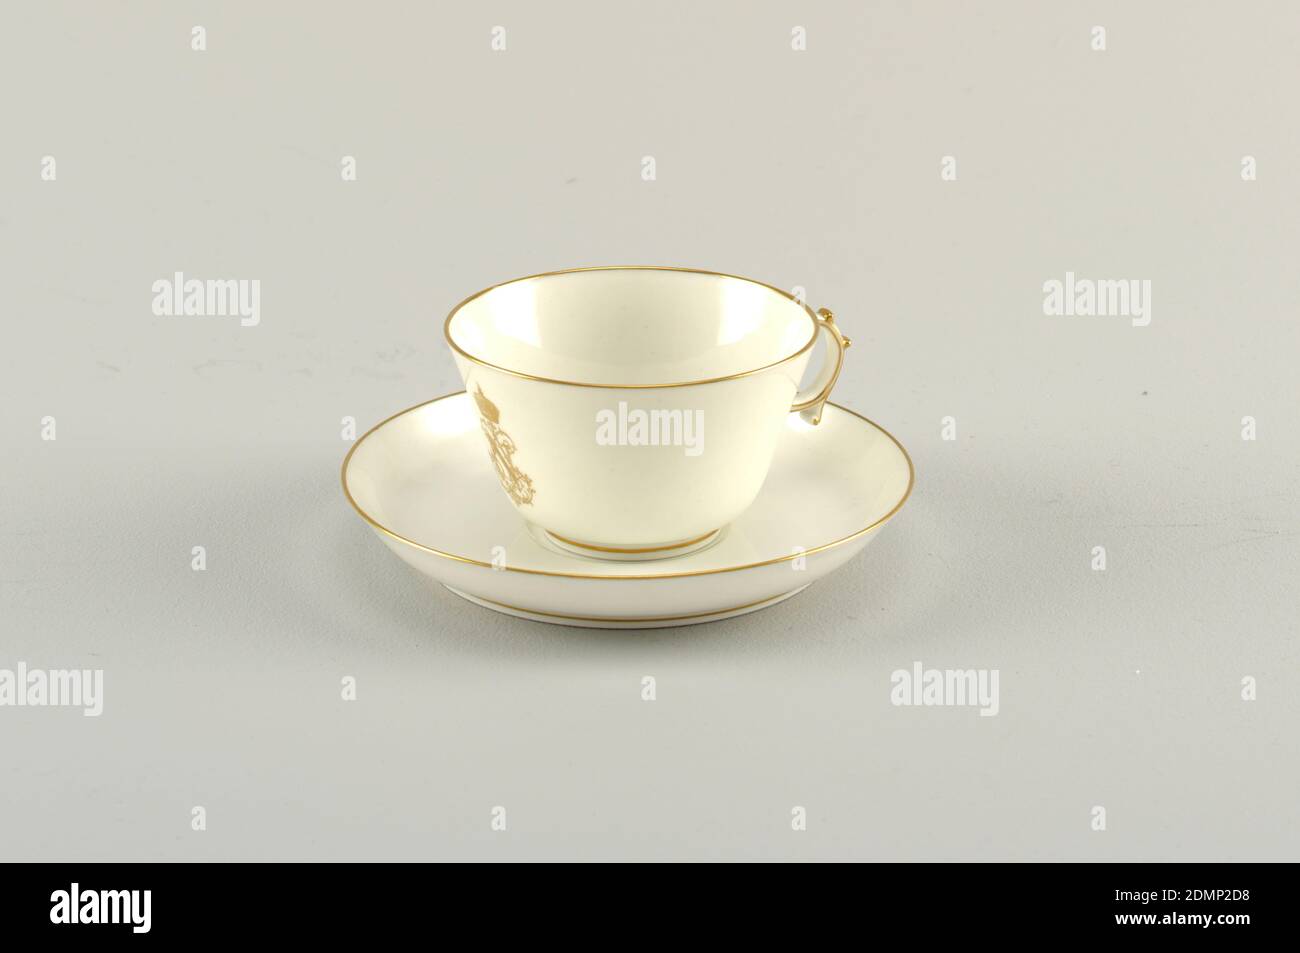 Cup and Saucer, from the Service des Officiers, Sèvres Porcelain Manufactory, French, established 1756 to the present, hard paste porcelain, gold, France, 1857–1858, ceramics, Decorative Arts, cup and saucer, cup and saucer Stock Photo